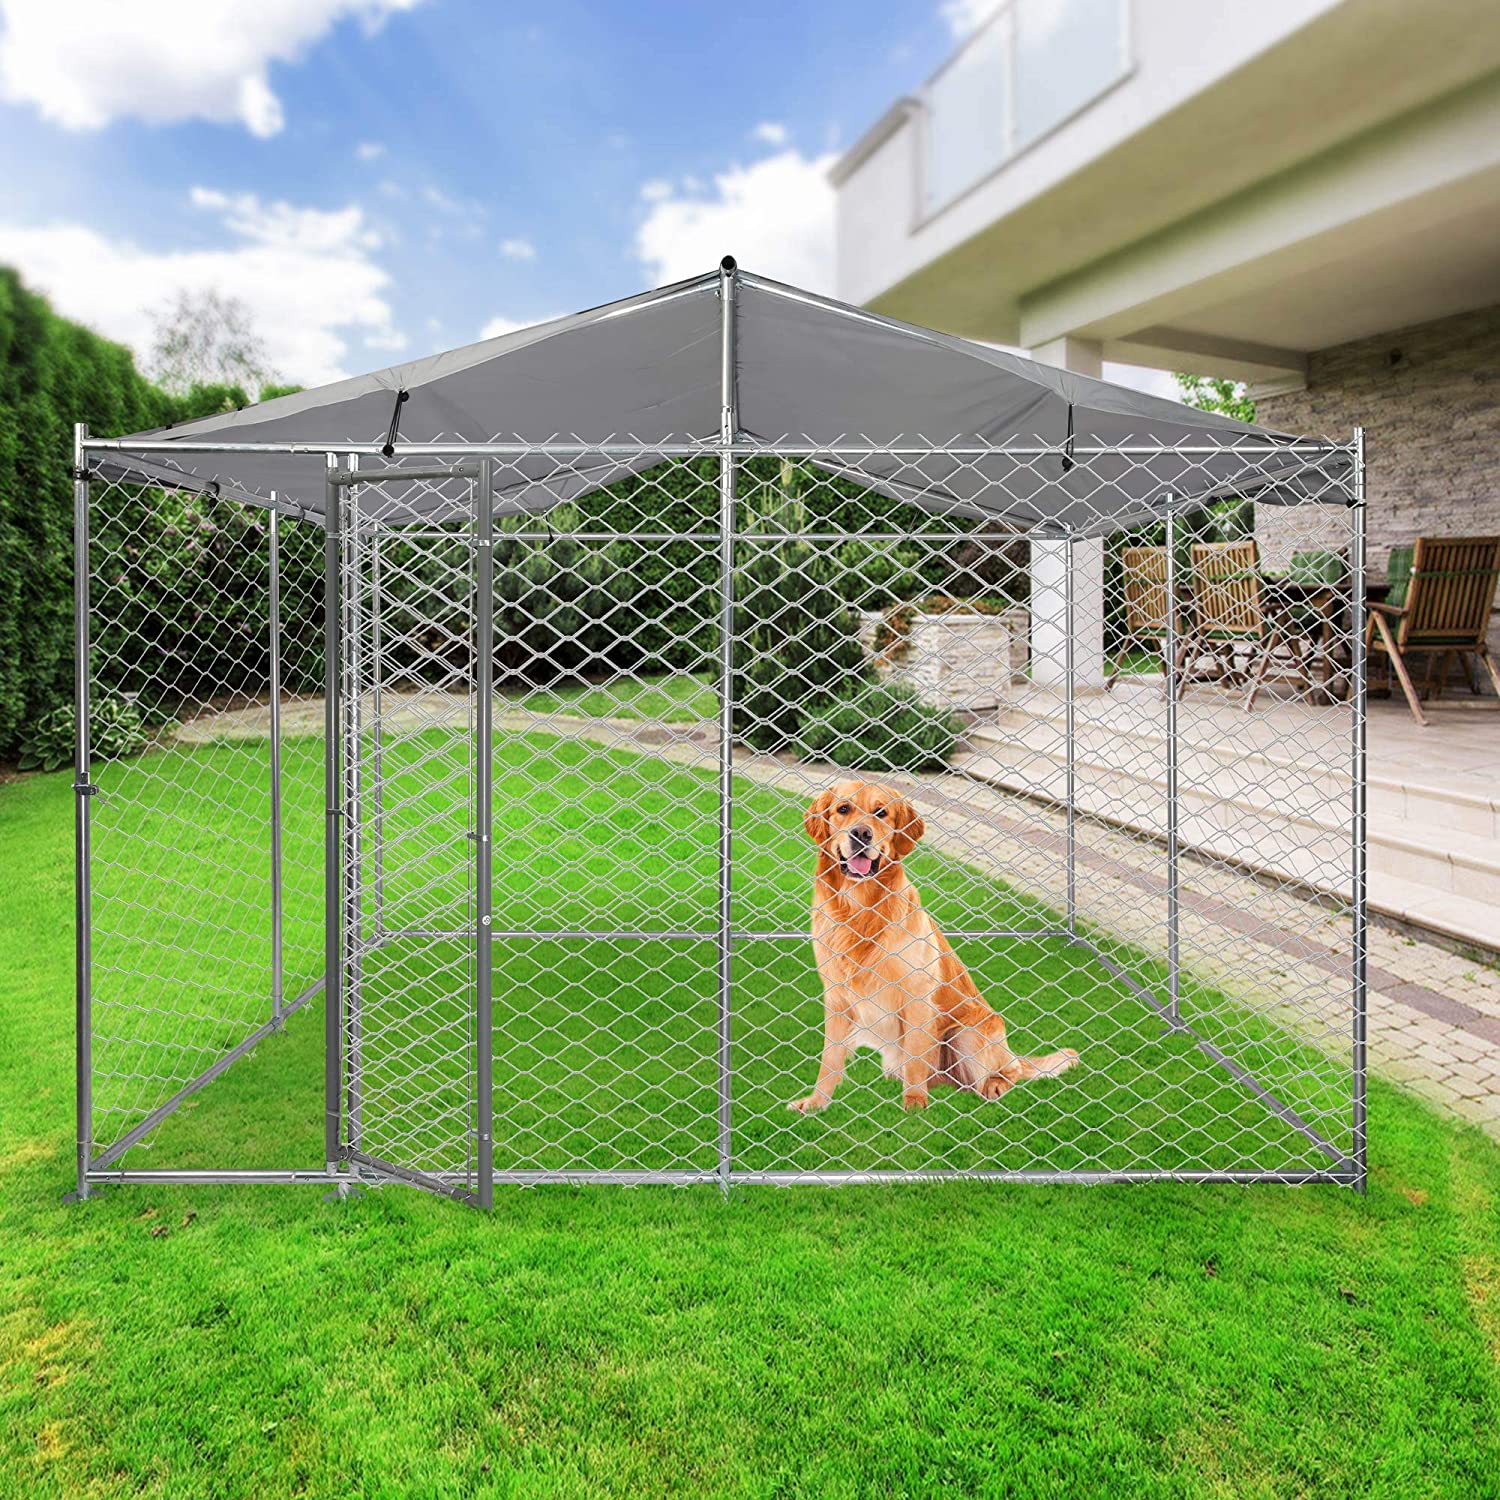 9.8'x9.8'x7.5' Large Outdoor Dog Kennel Galvanized Steel Pet Playpen with Waterproof Cover Secure Lock